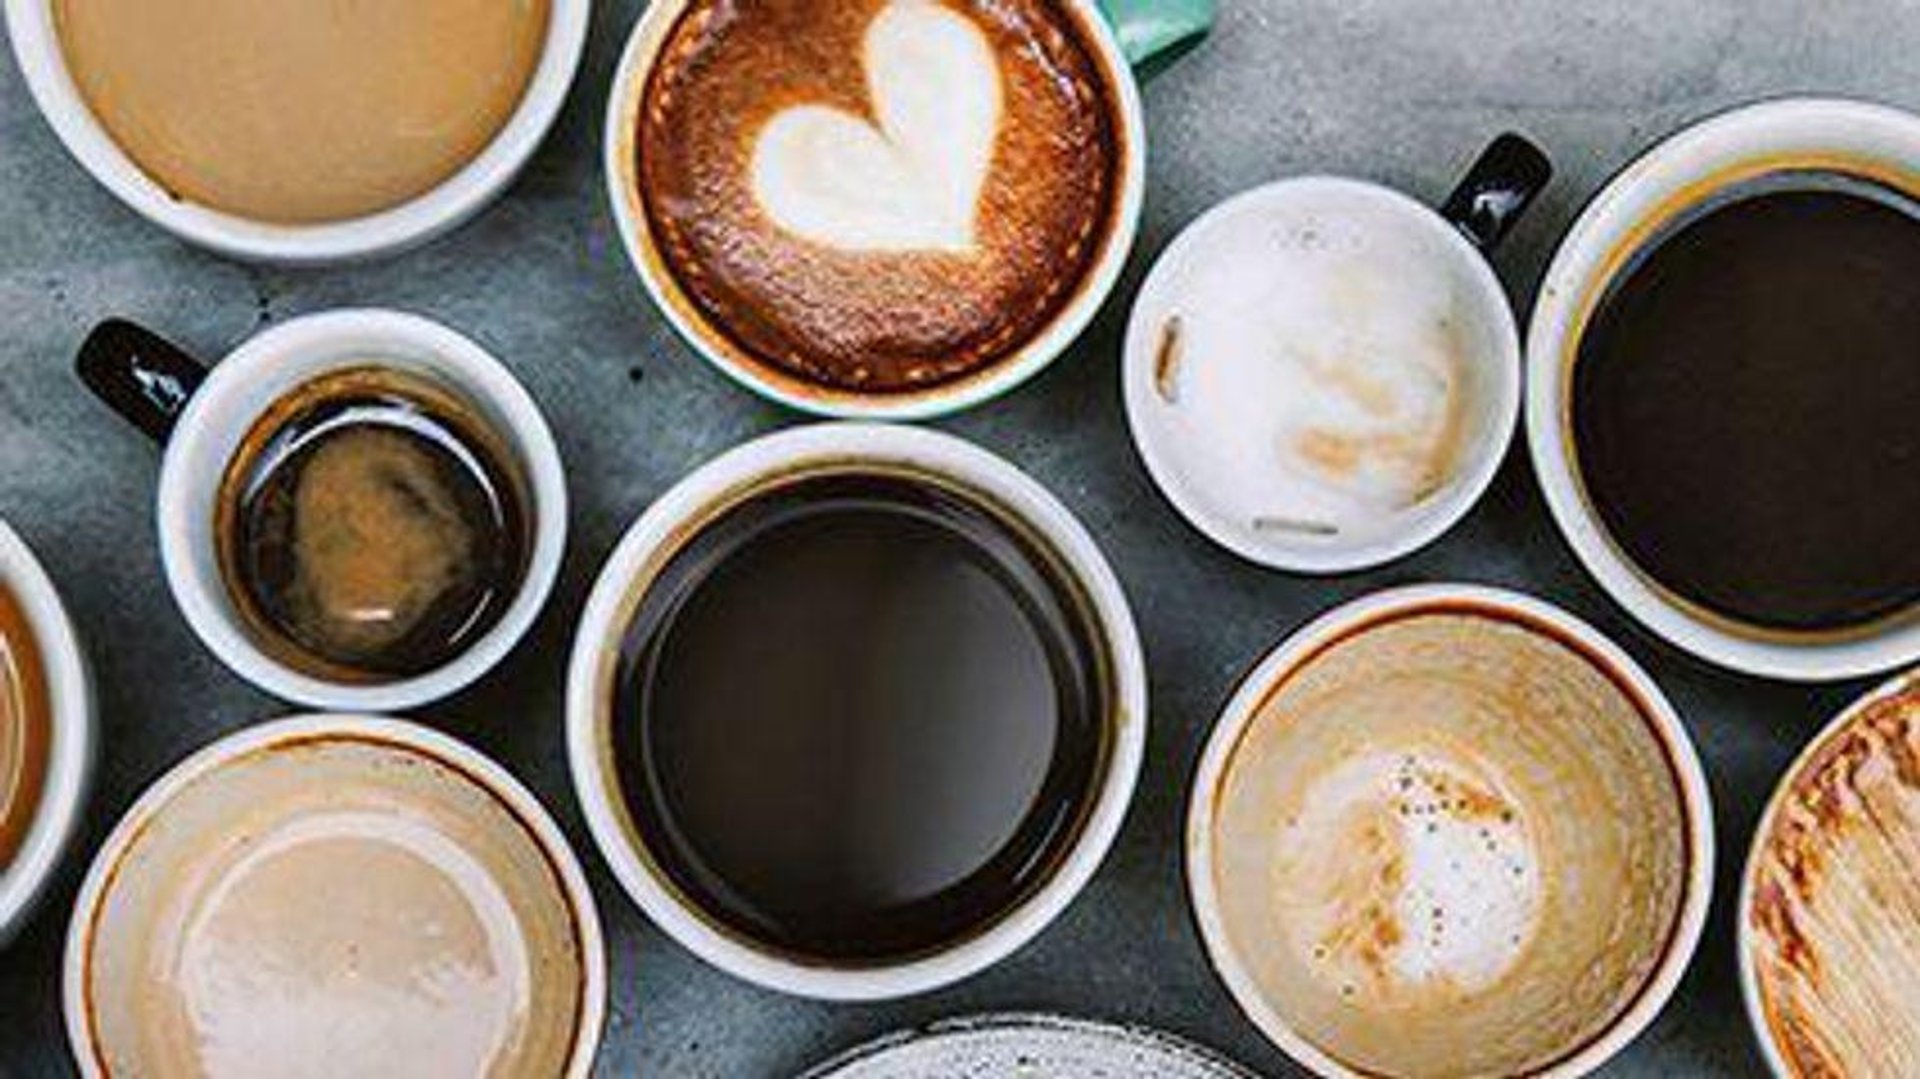  Coffee Could Perk Up Your Liver